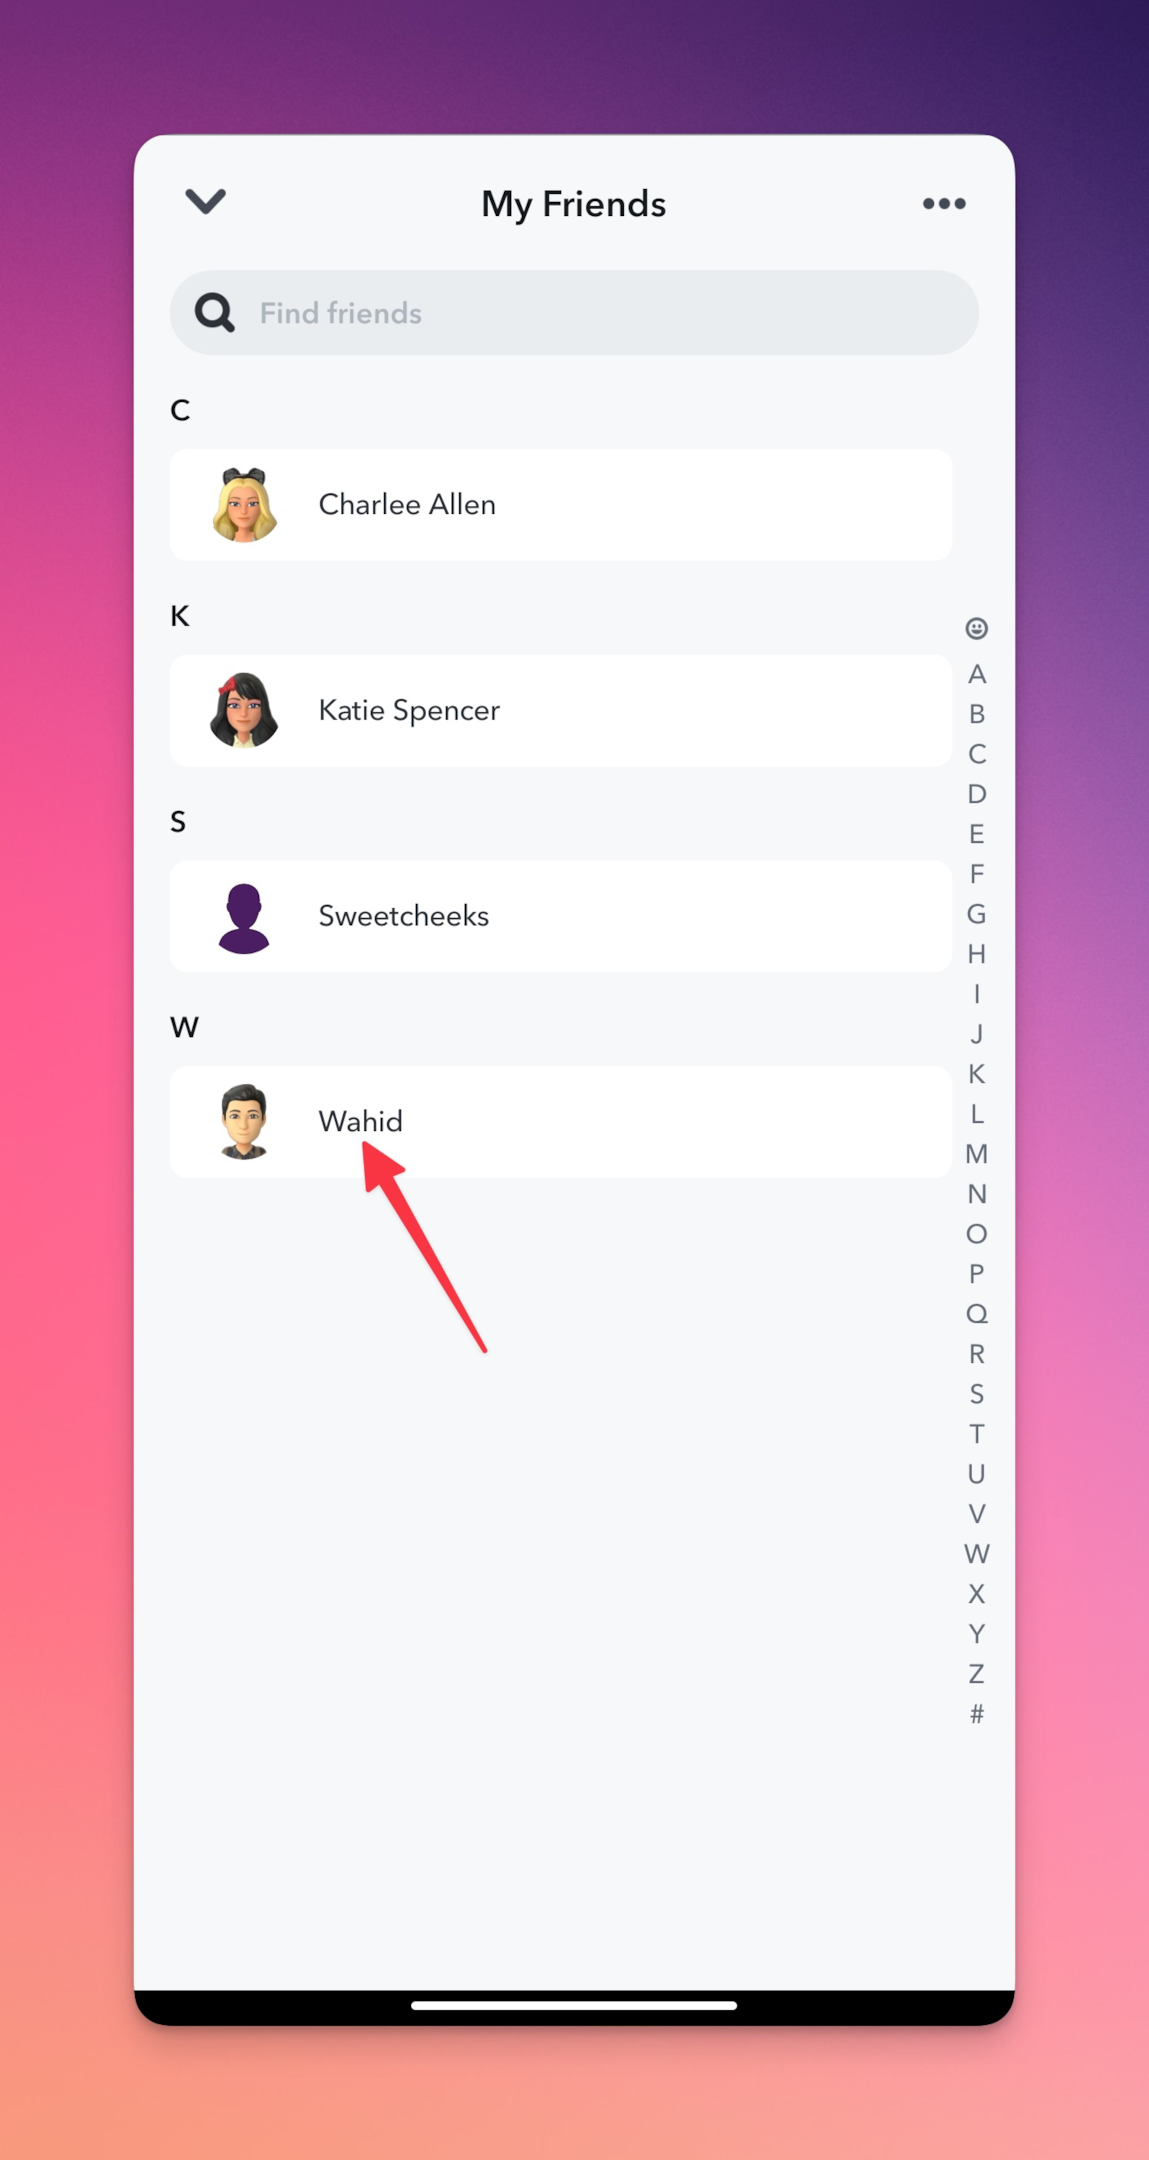 Remote.tools pointing to a friend's profile on Snapchat and long press to block friend (in order to hide your snapchat score from them)